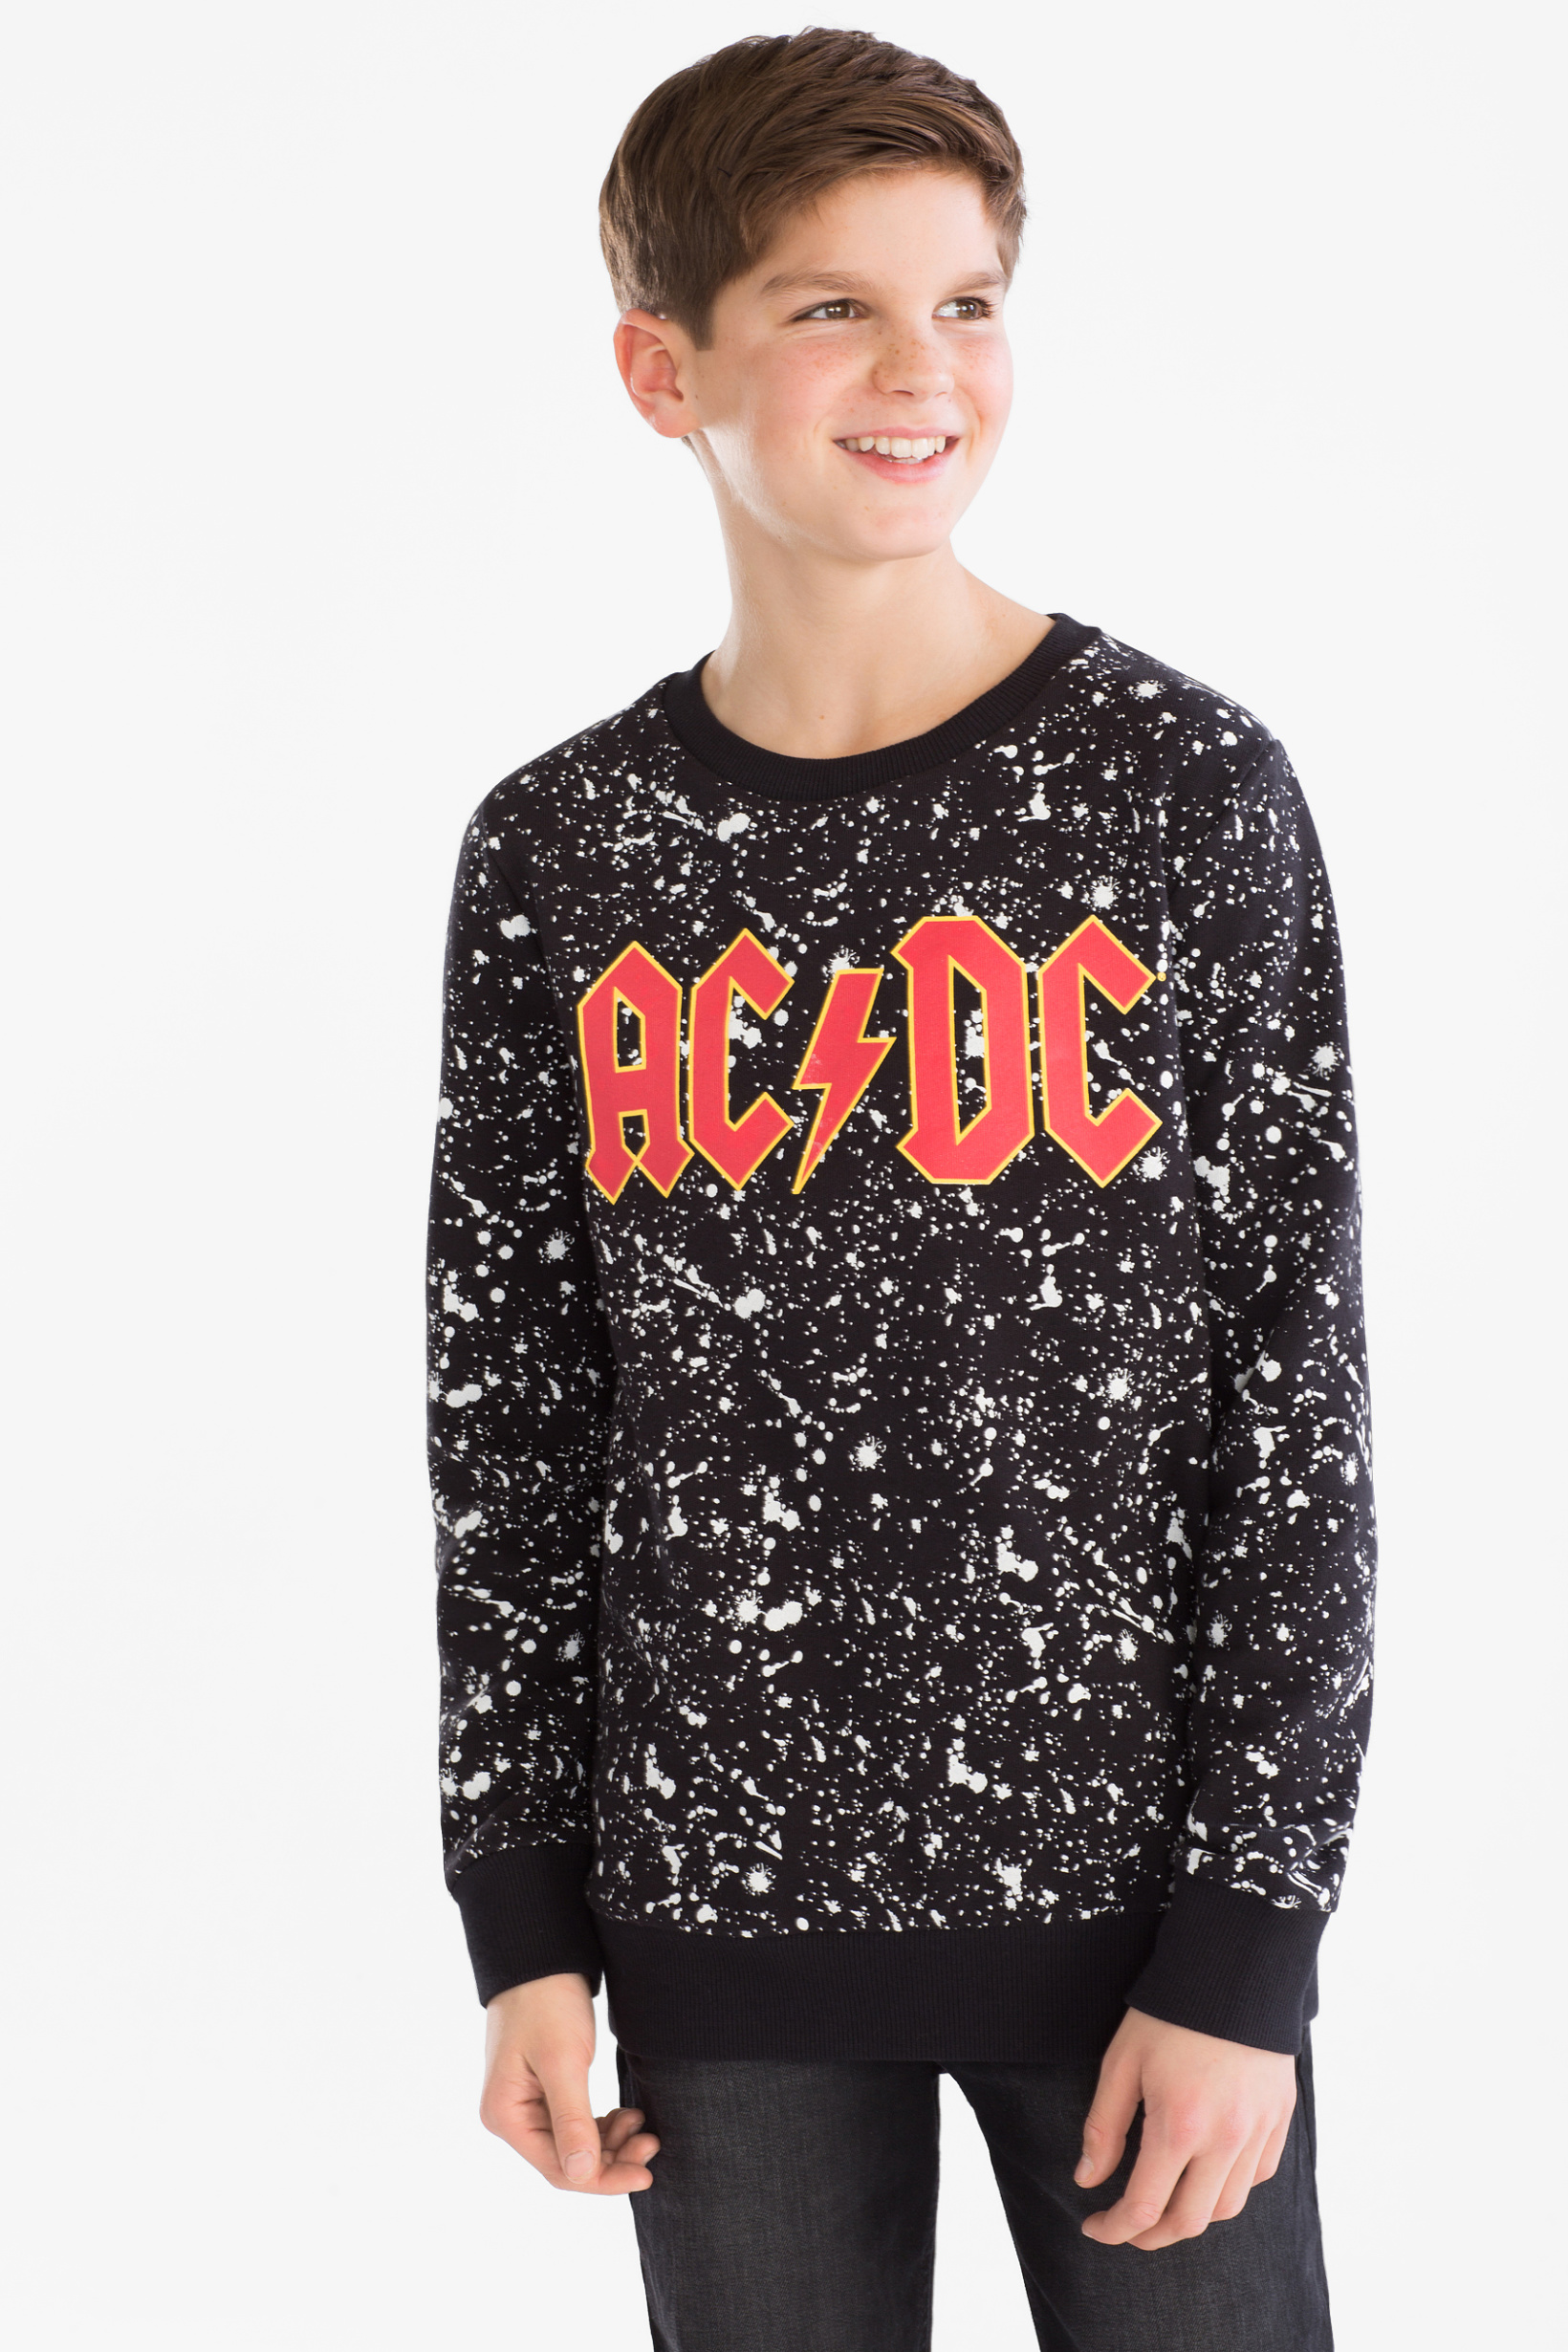 Here and There AC-DC sweatshirt